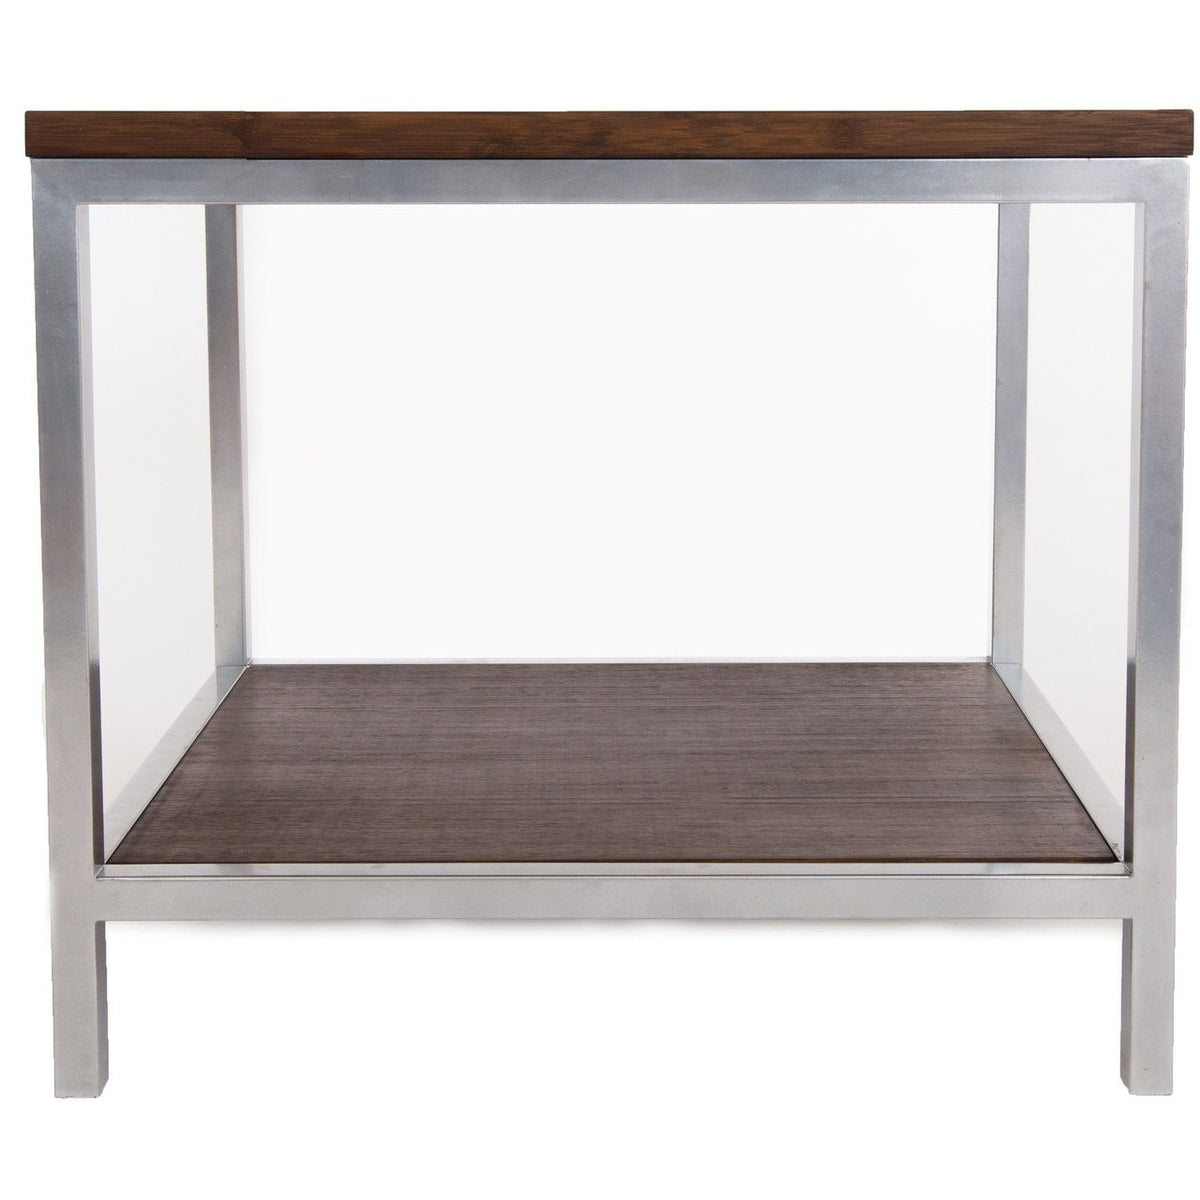 Bamboogle Rustic Grey Square Side Table With Silver Legs BKL-30-S-2424-G-Minimal & Modern